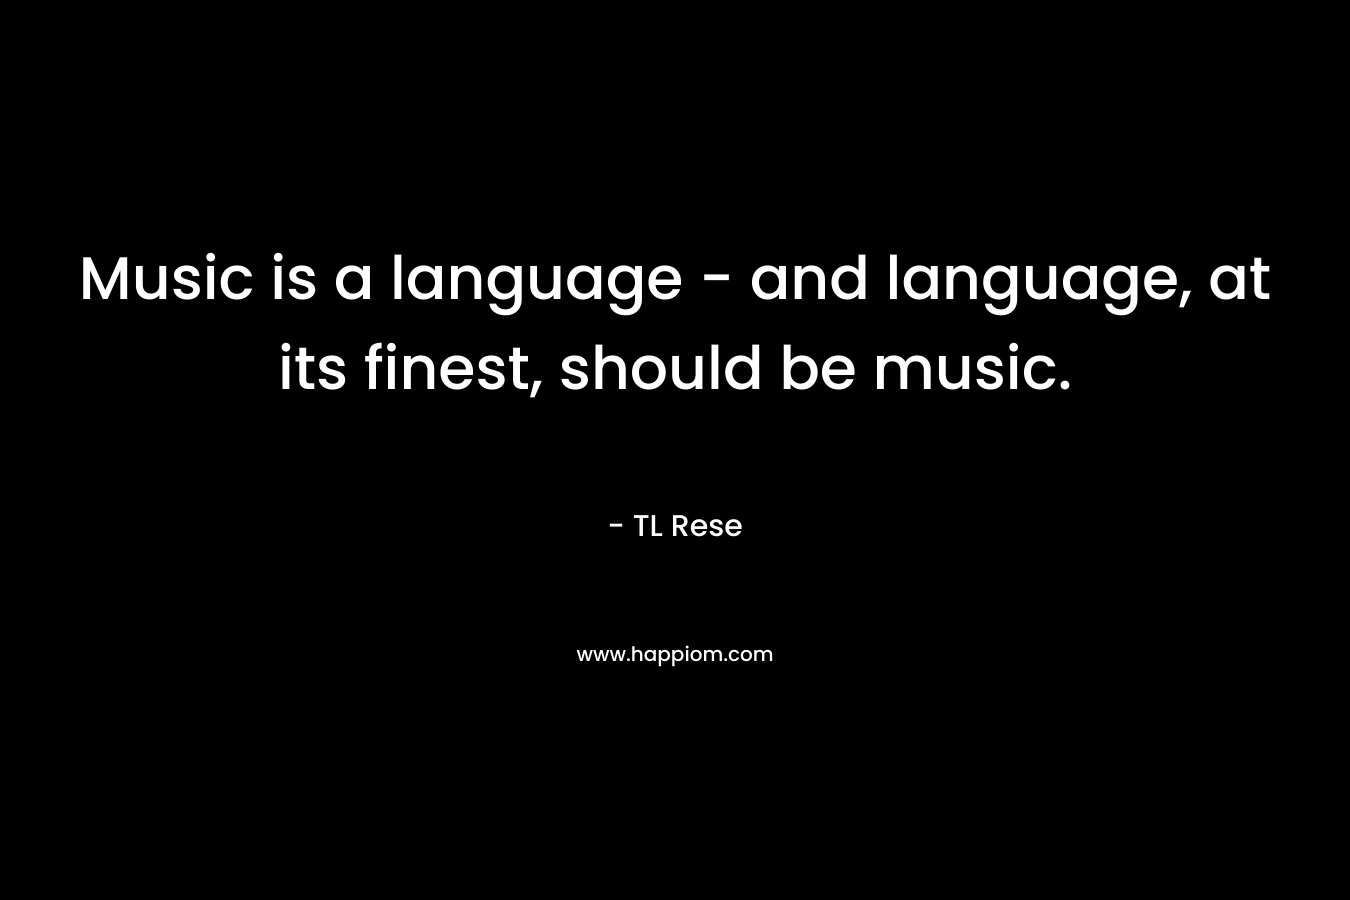 Music is a language - and language, at its finest, should be music.